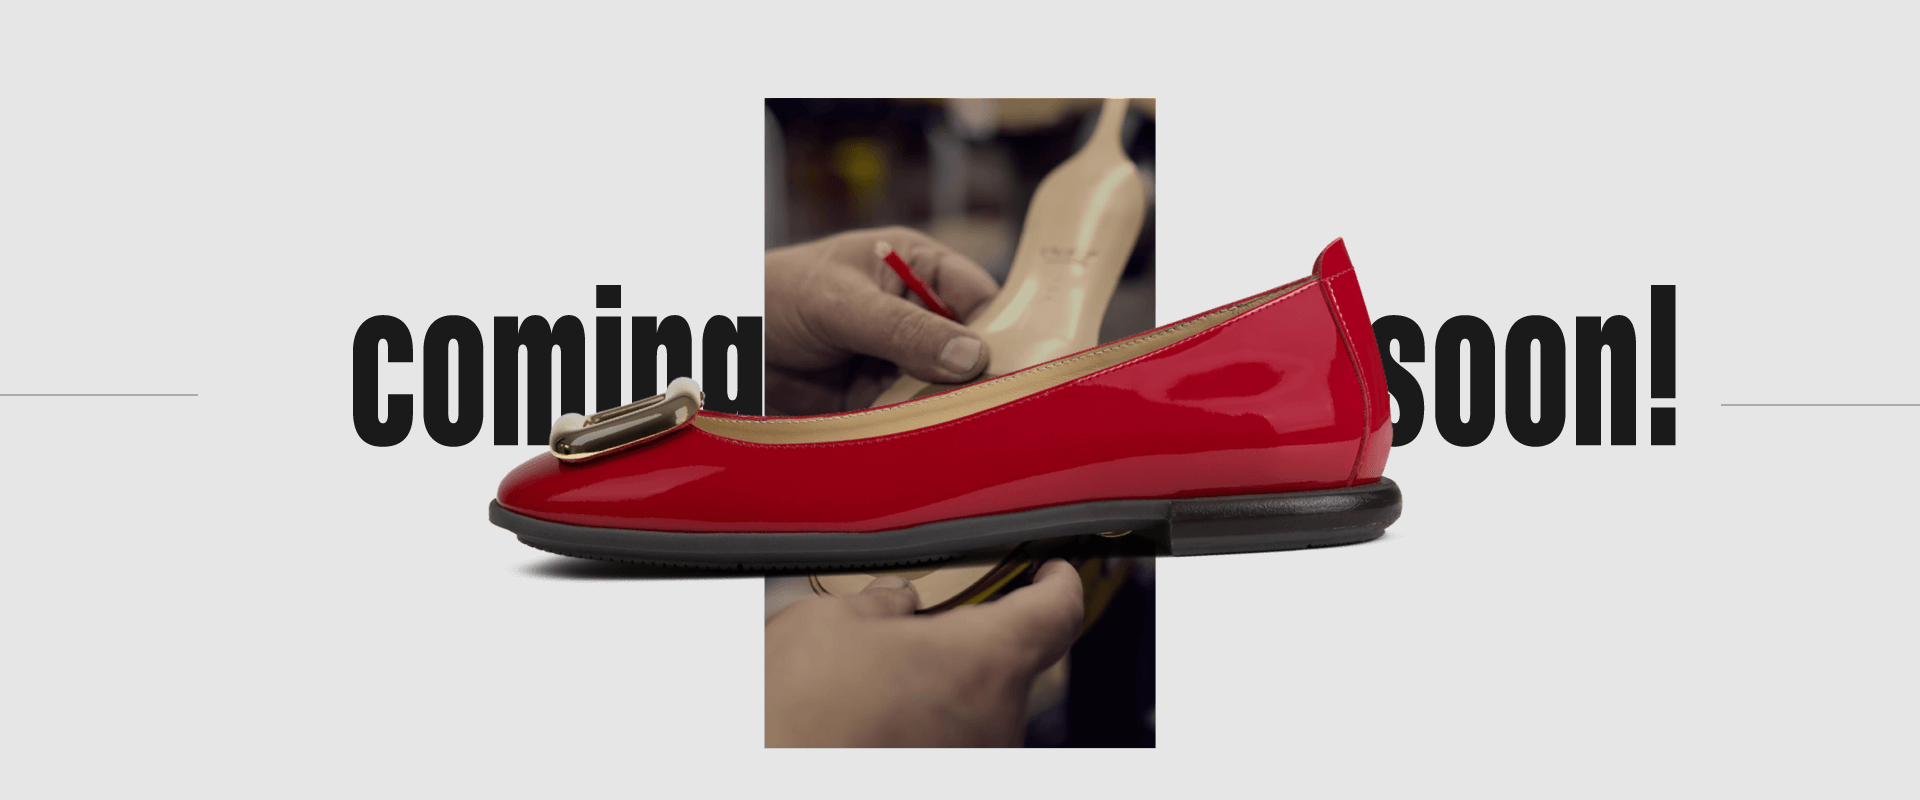 kallú-kallu-red-leather-ballerinas-flats-shoes-made-in-spain-for-women